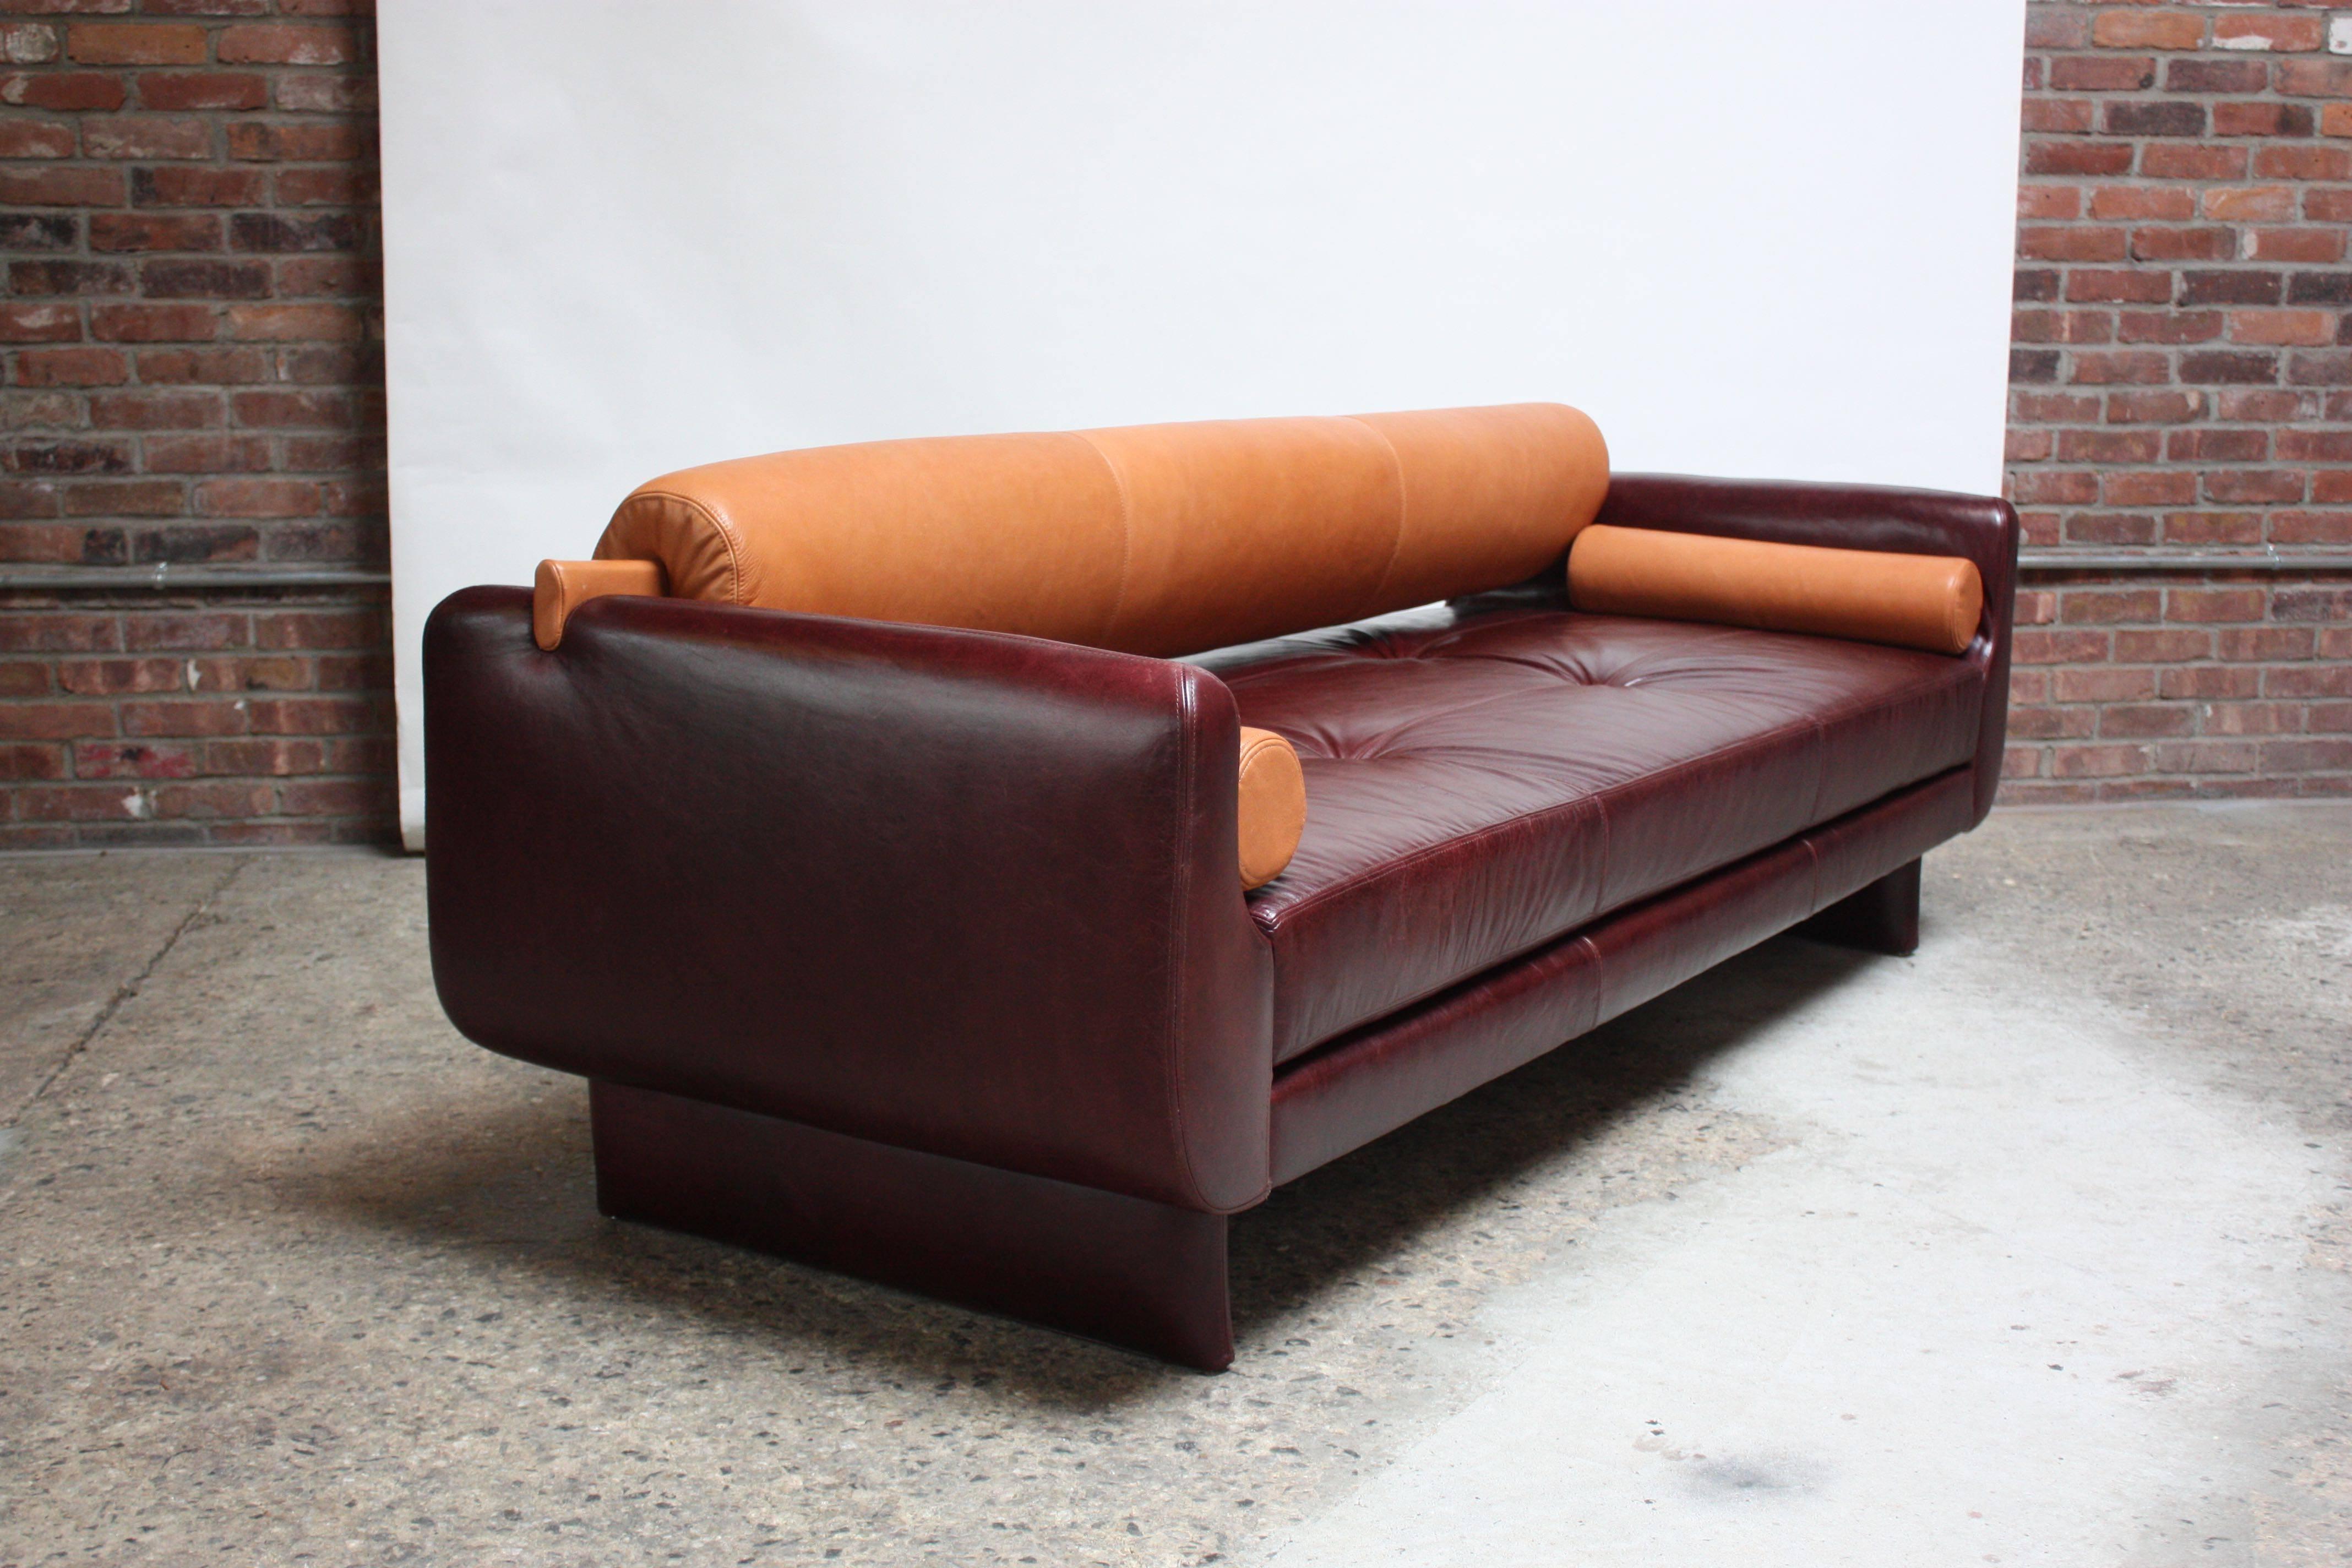 Remarkable sofa designed by Vladimir Kagan for American Leather Studios composed of two removable bolster accent pillows and back bolster in leather. The removal of the back bolster converts the sofa to a daybed.
Completely redone with brand new